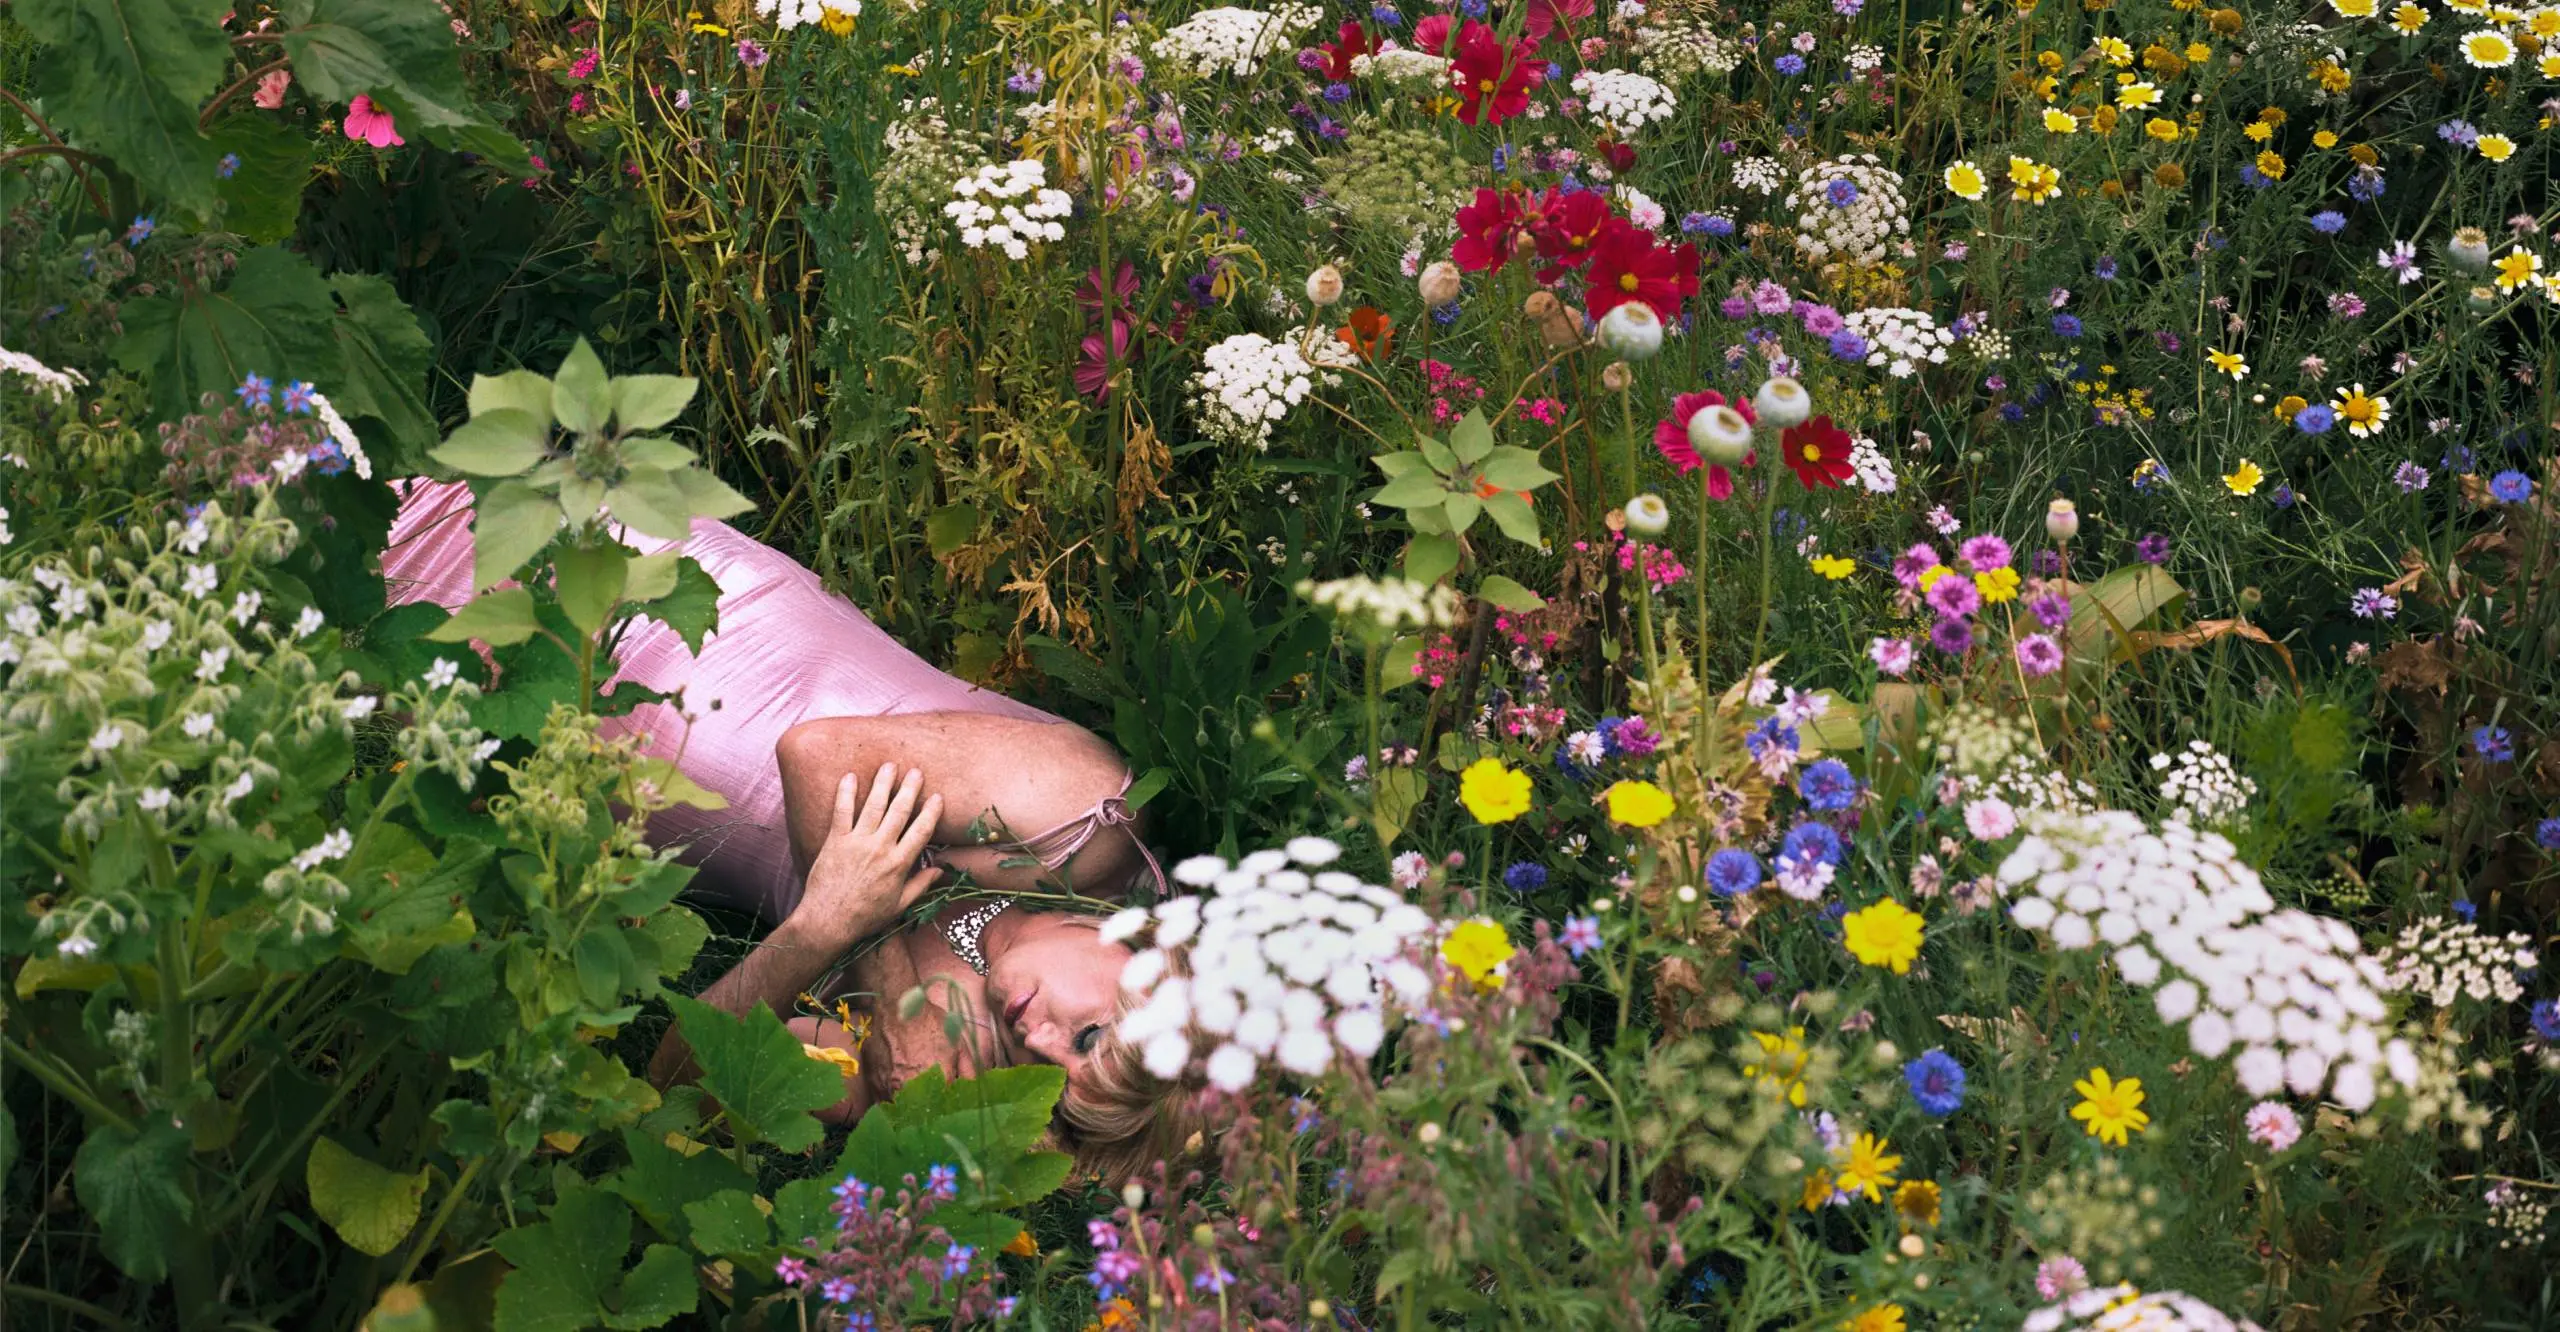 Colour photograph of a person laying down in a garden wearing a pink dress and surrounded by wild flowers